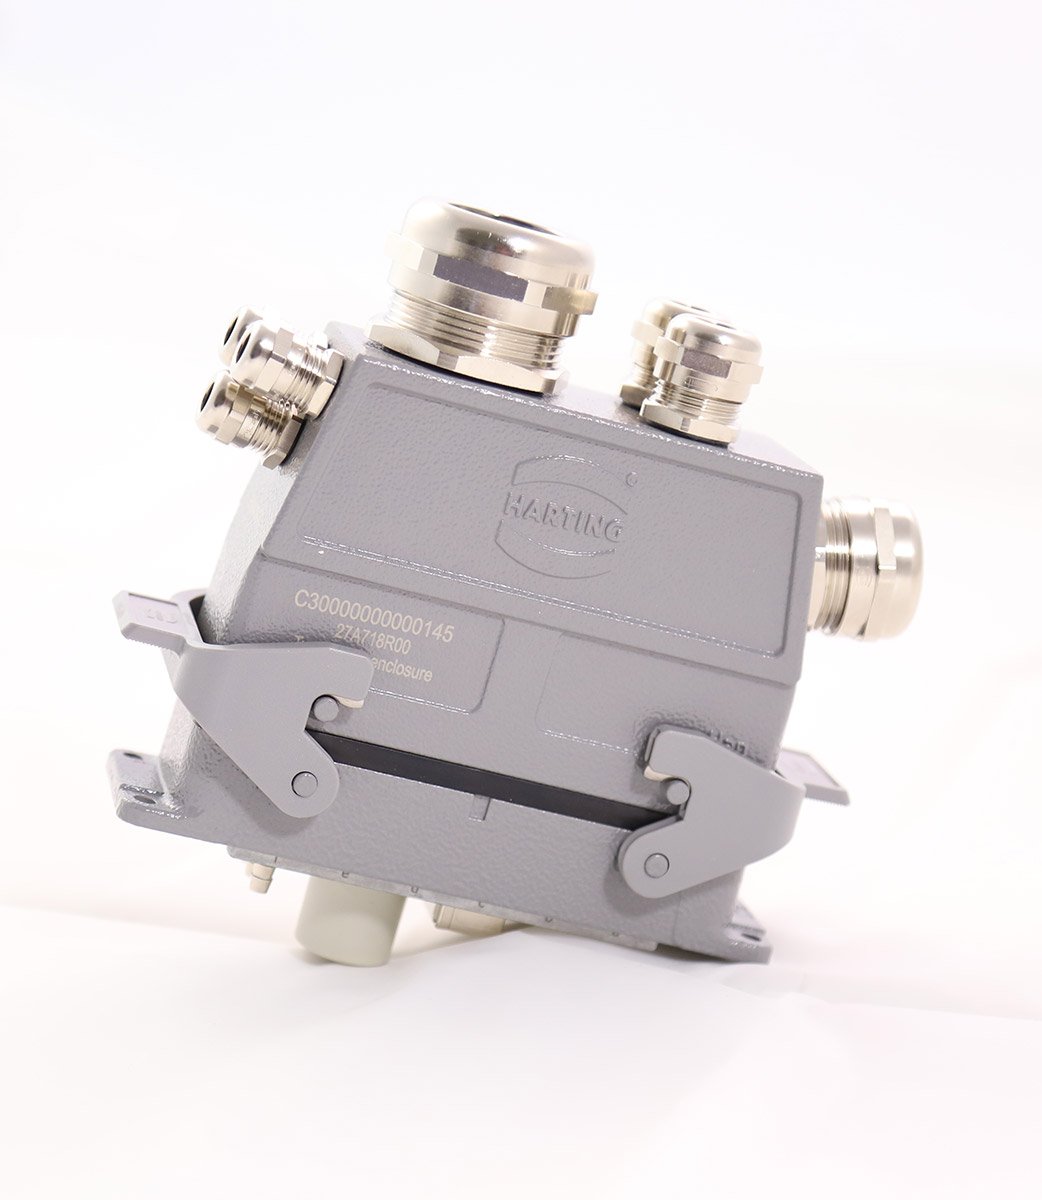 Customised Industrial Connectors Harting Technology Group